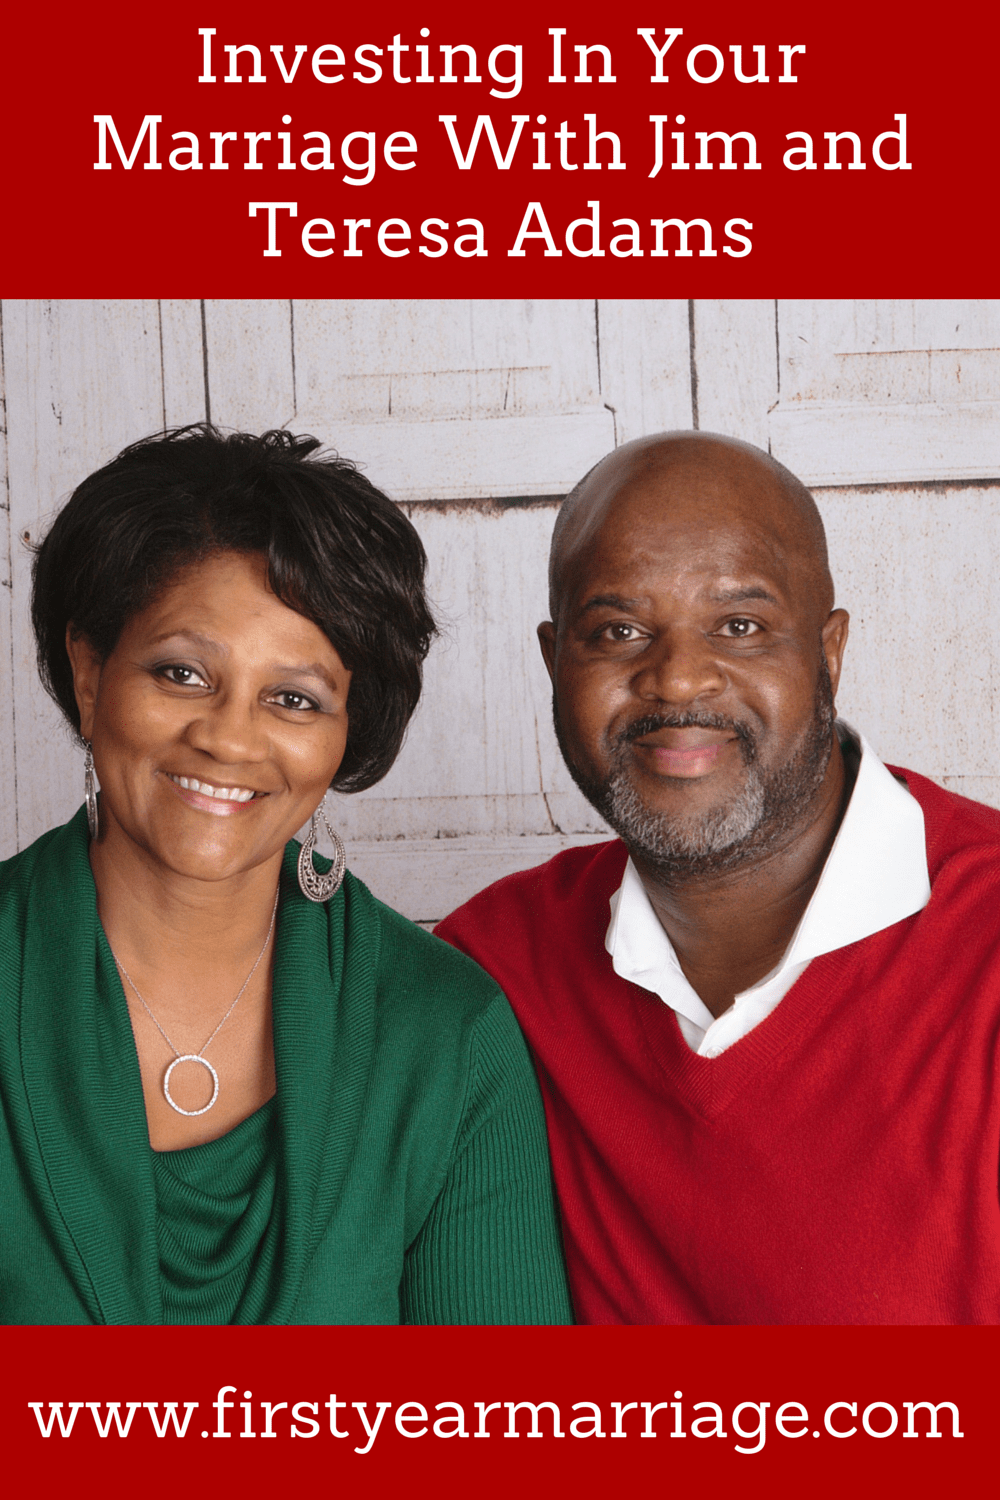 Investing In Your Marriage With Jim and Teresa Adams